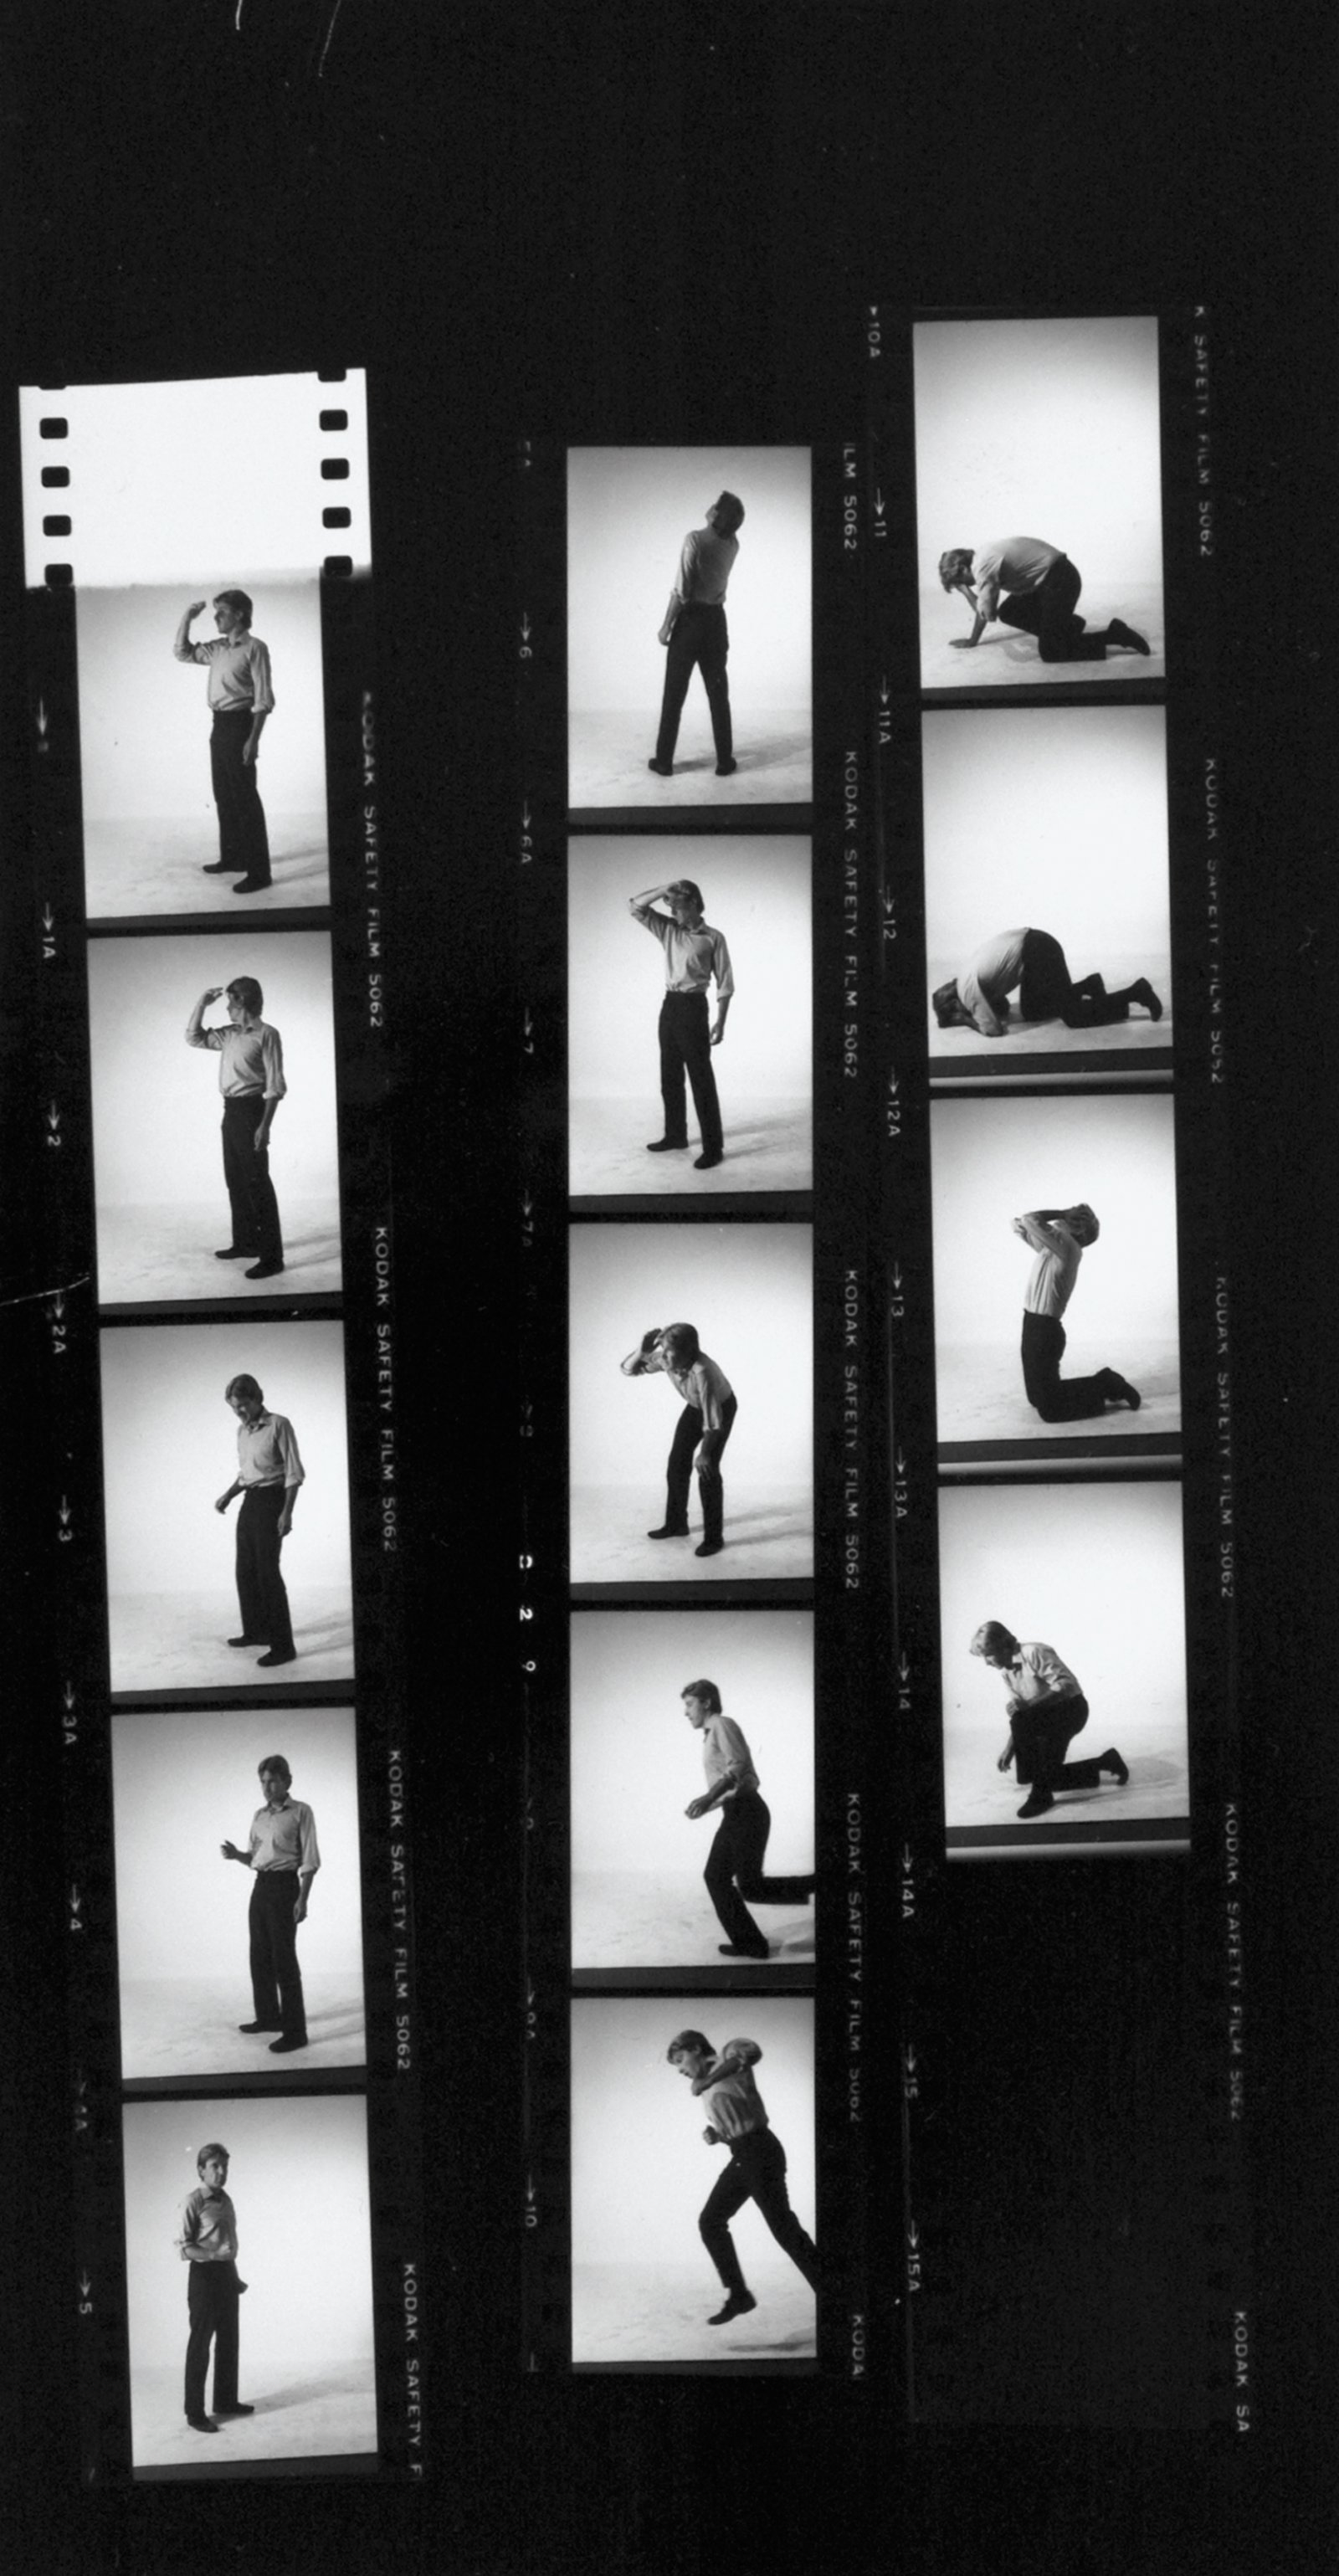 Ian Wallace, Contact sheets for Lookout, 1979, silver gelatin prints, 10 contact sheets, each 10 x 8 in. (25 x 20 cm)